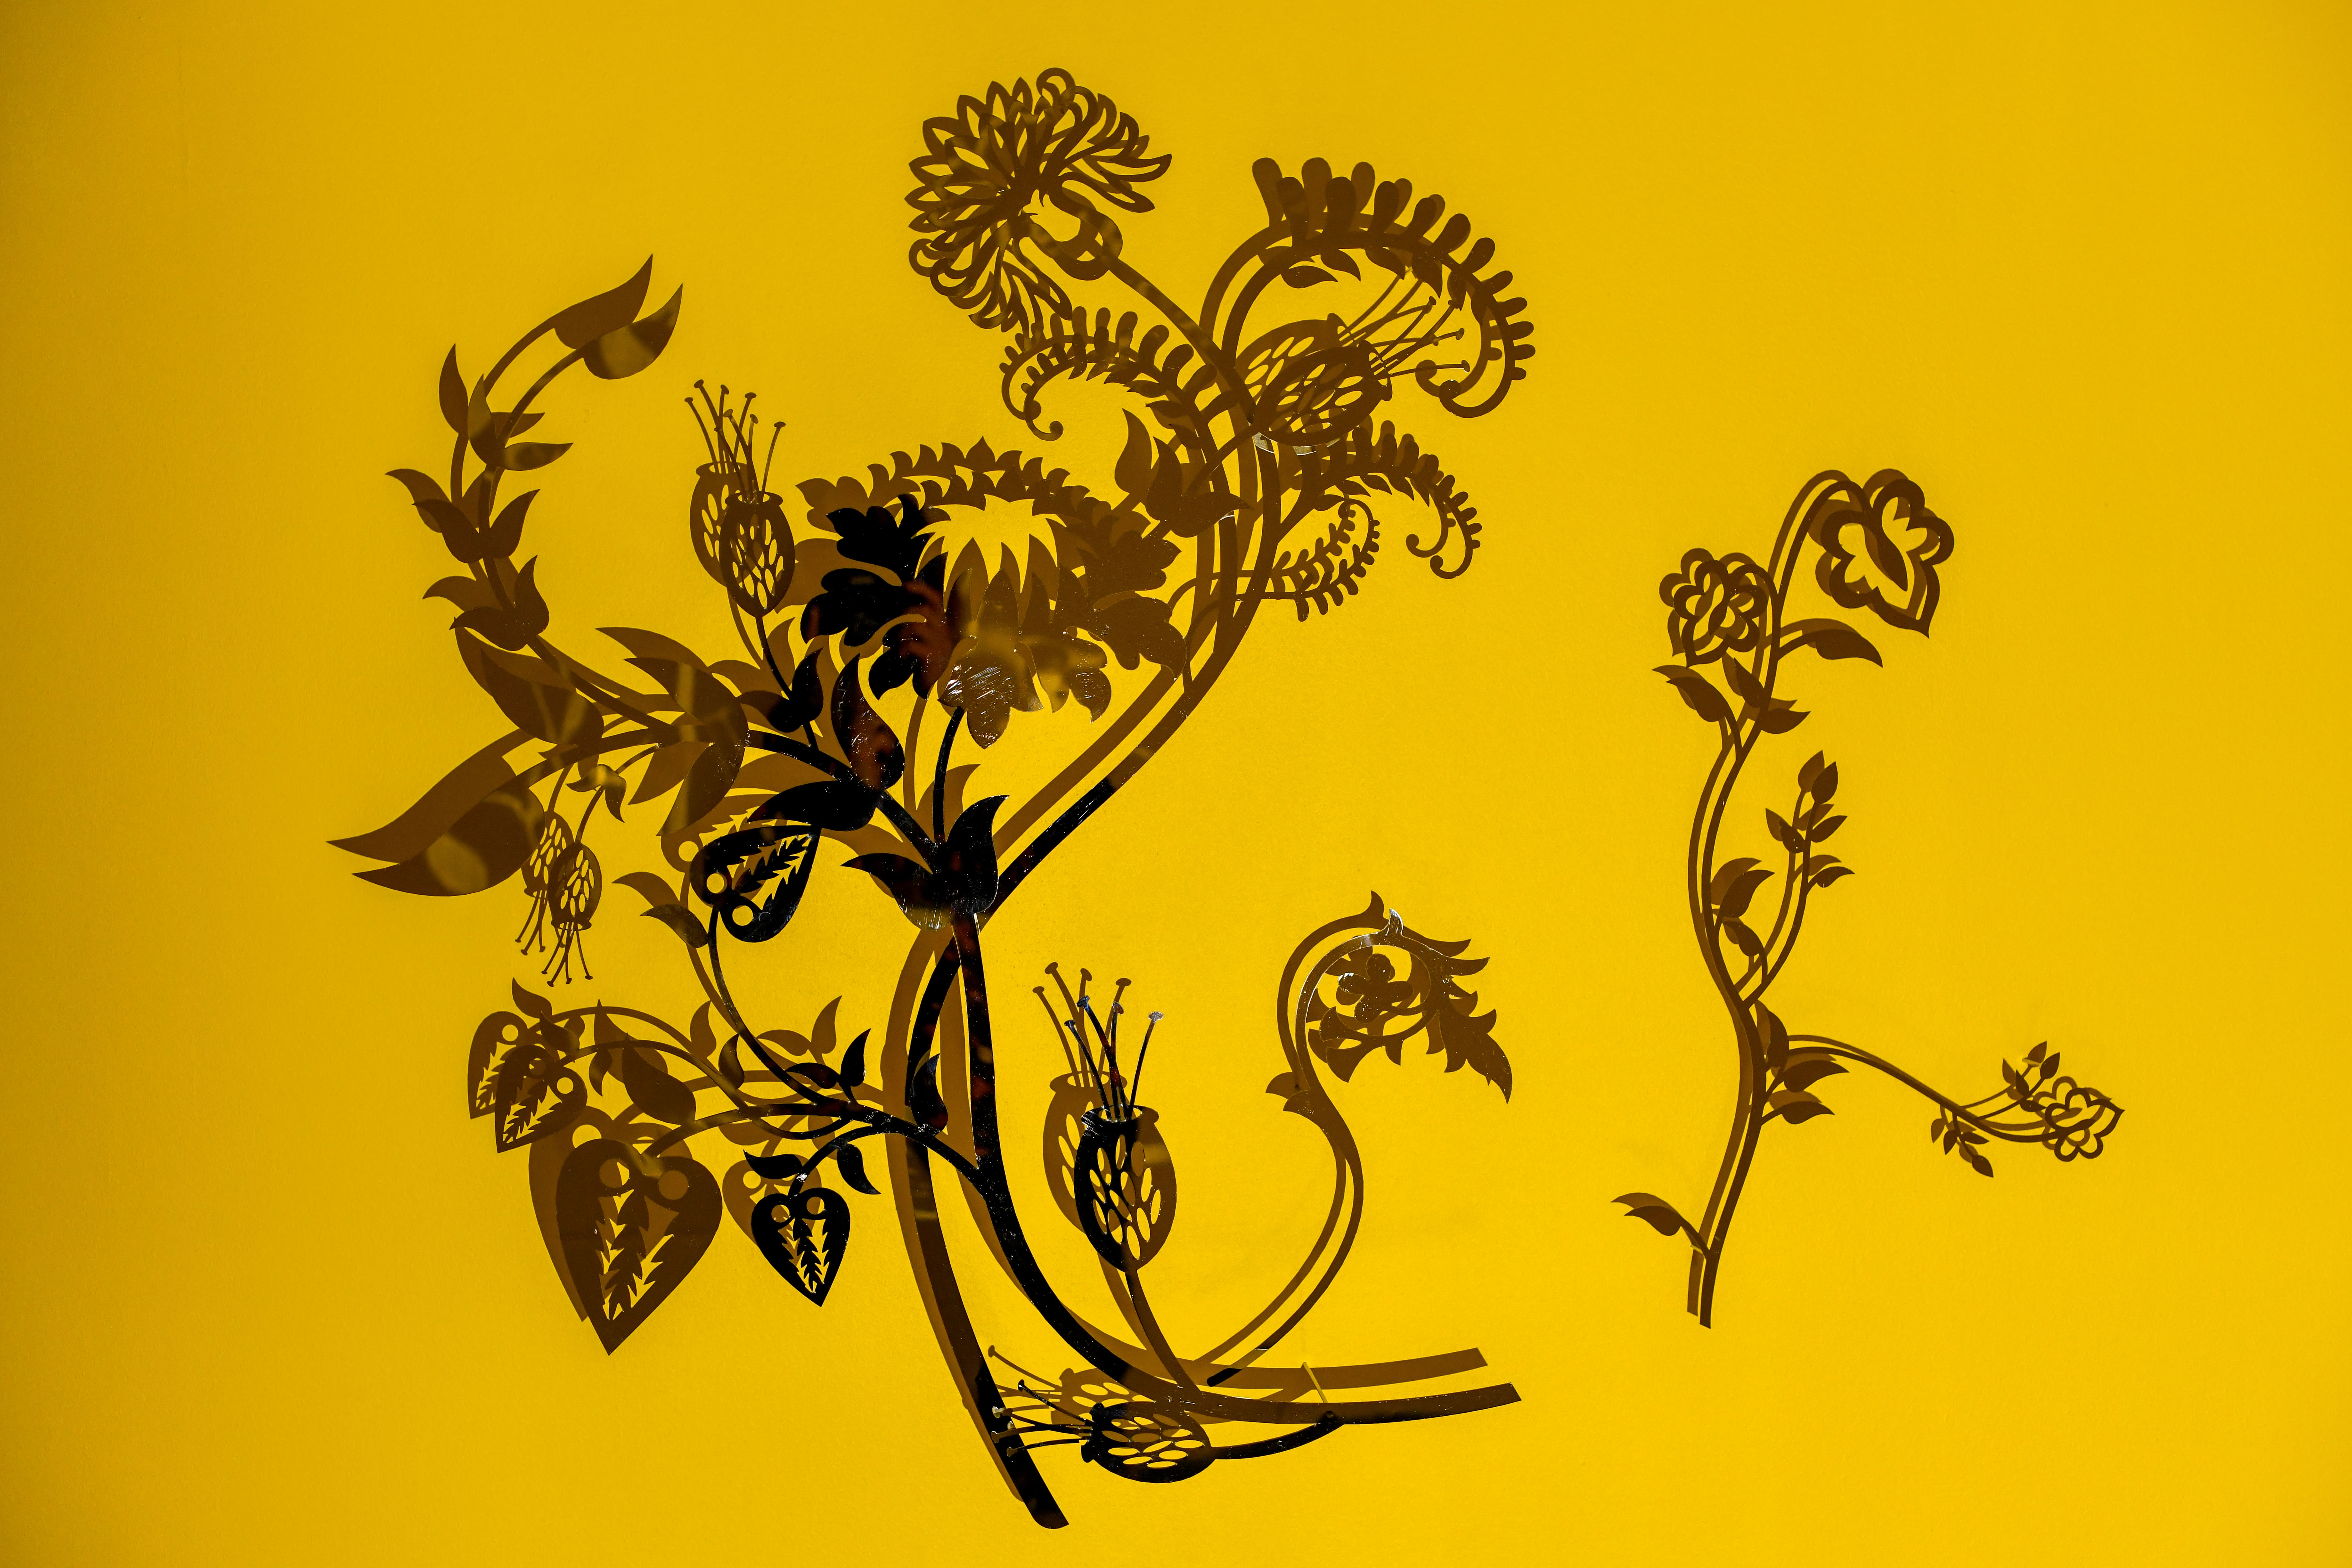 Steel wall-mounted piece consisting of a variety of wild plants